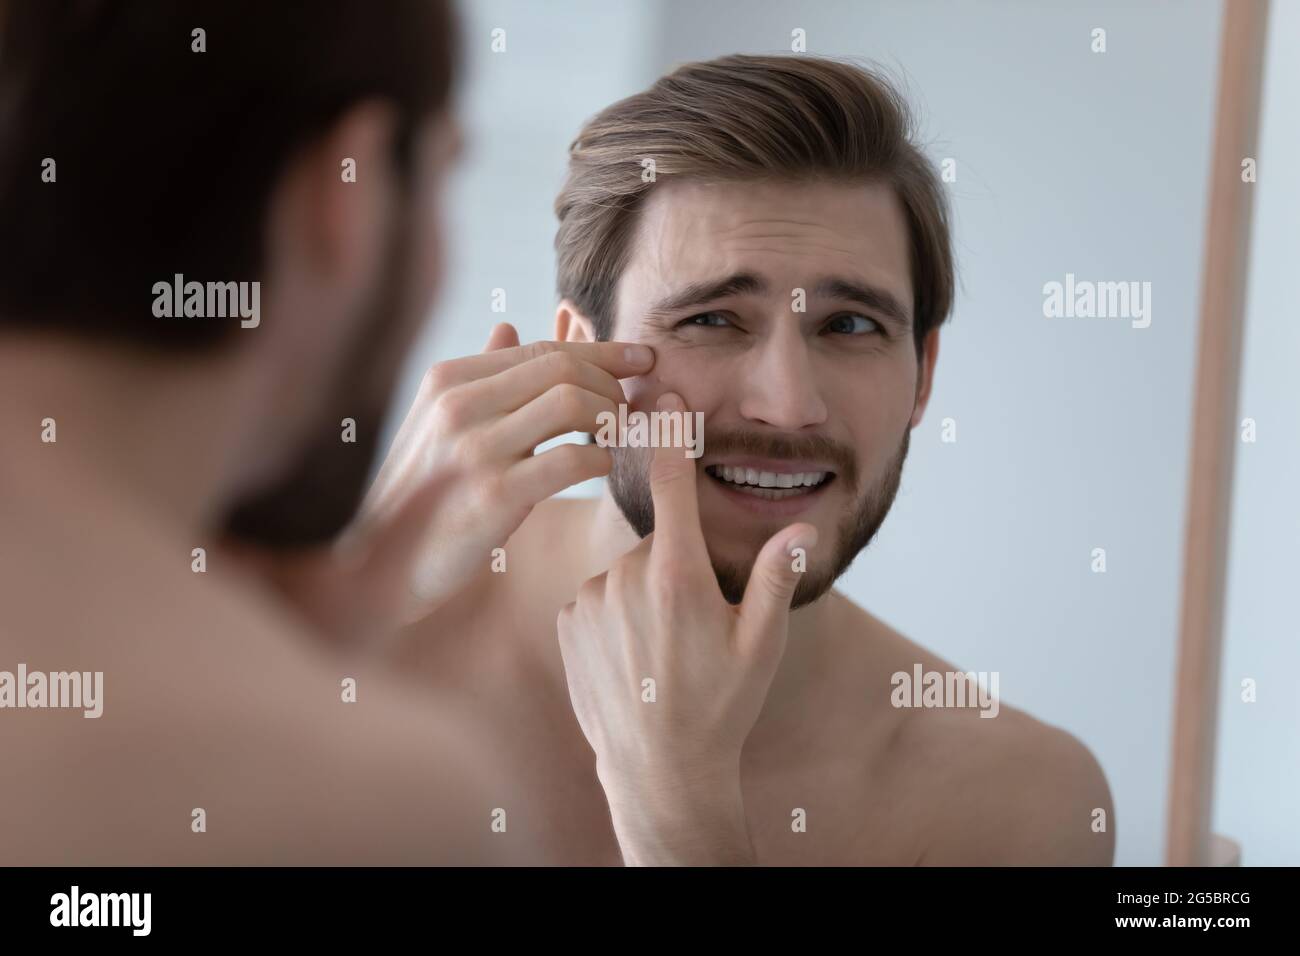 Frustrated handsome millennial guy concerned about facial skin problem Stock Photo